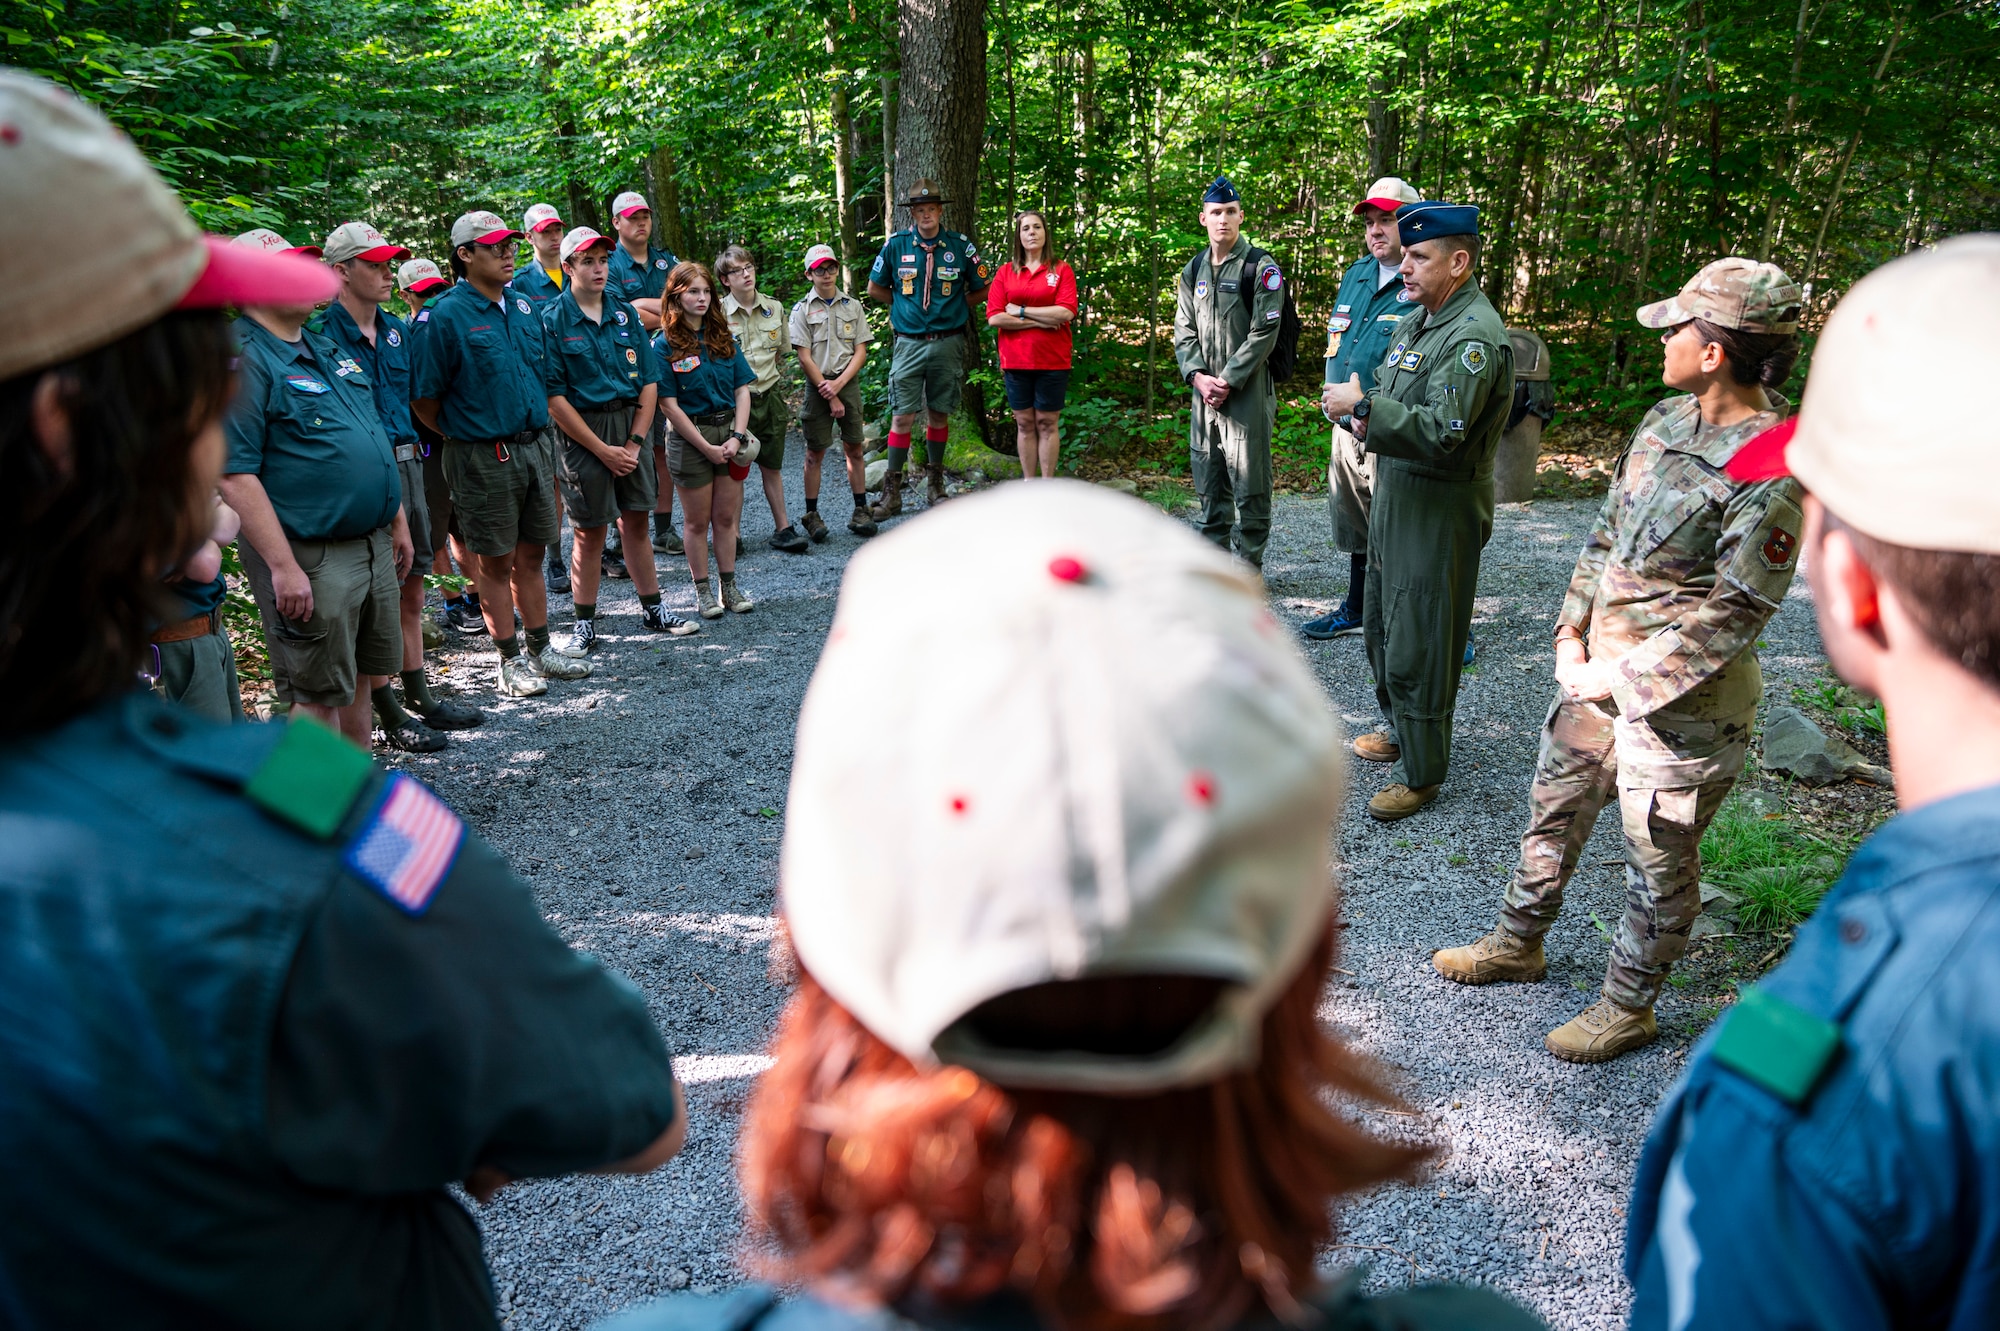 U.S. Air Force Brig. Gen. Christopher Amrhein, Air Force Recruiting Service commander, speaks to Boy Scouts of America staff and camp counselors at Camp Minsi in Pocono Summit, Penn., July 22, 2023